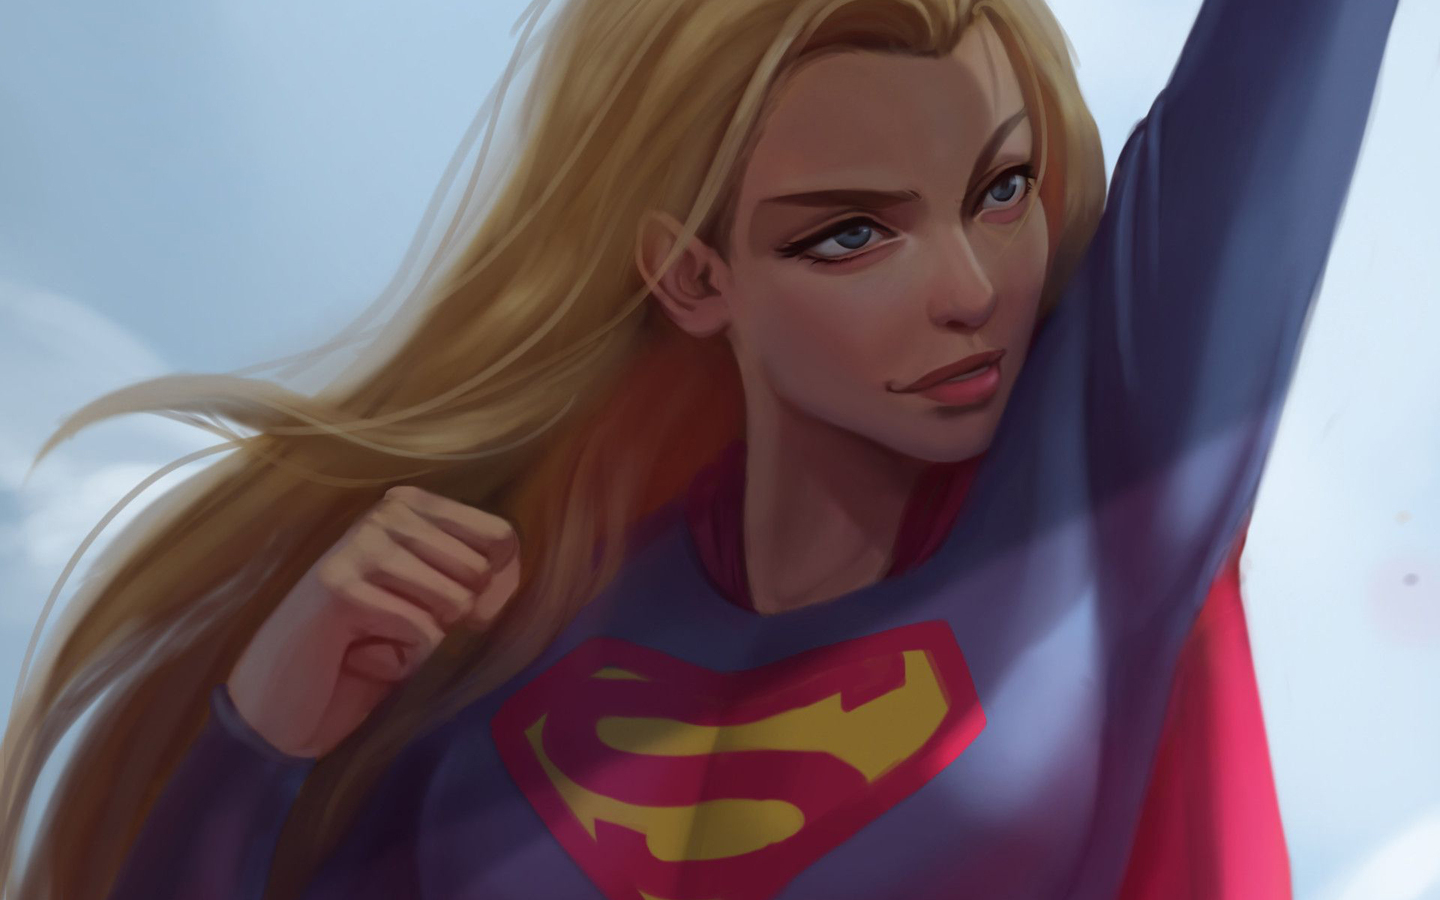 1440x900 Cute Supergirl Artwork 1440x900 Resolution HD 4k Wallpapers,  Images, Backgrounds, Photos and Pictures